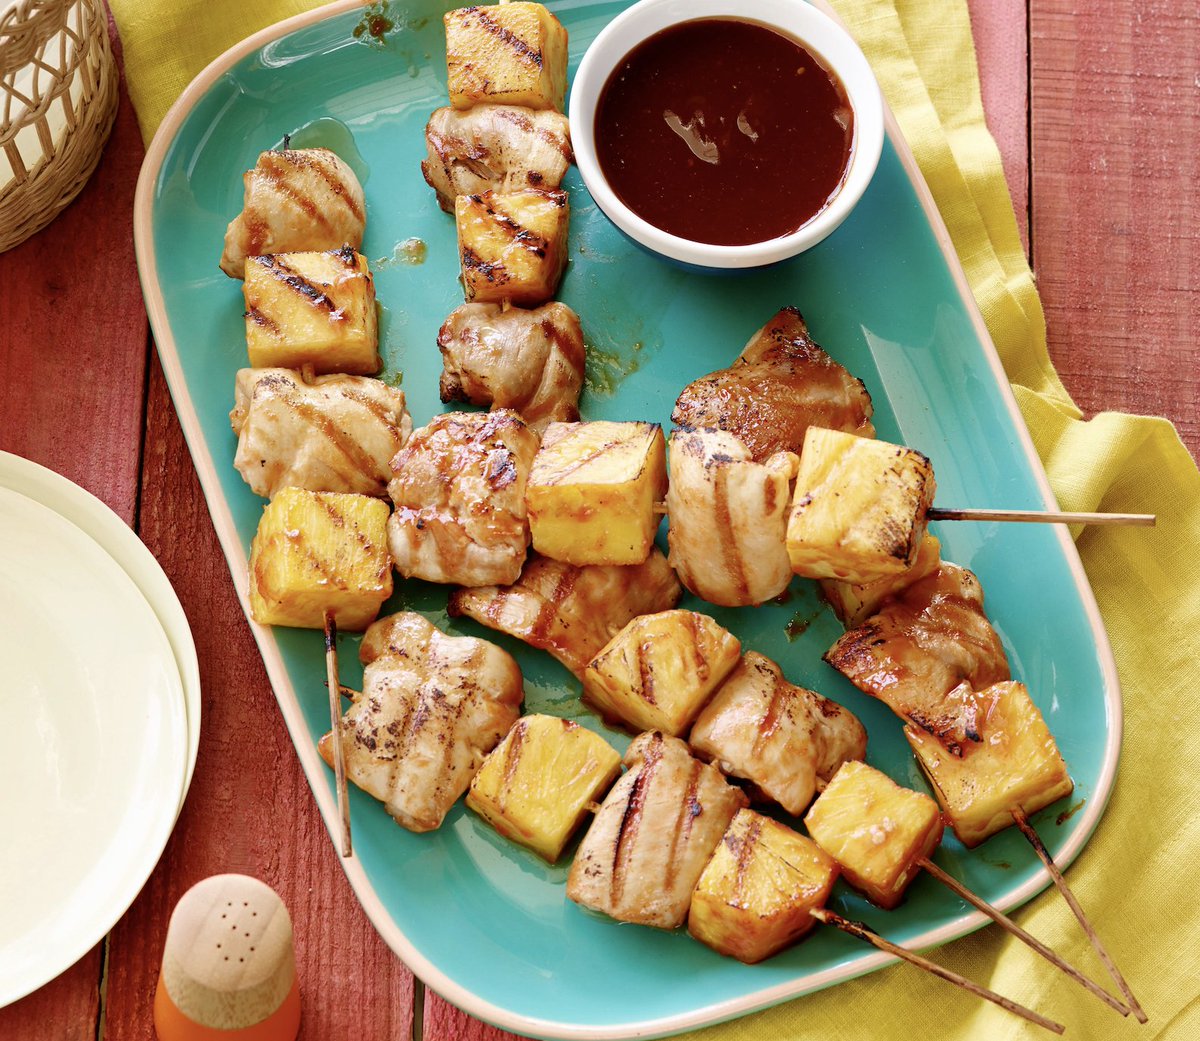 Give your grill a break from burgers and dogs, and throw on these sweet skewers instead! 🍍 Get @TylerFlorence's recipe: cooktv.com/3w0eEeB